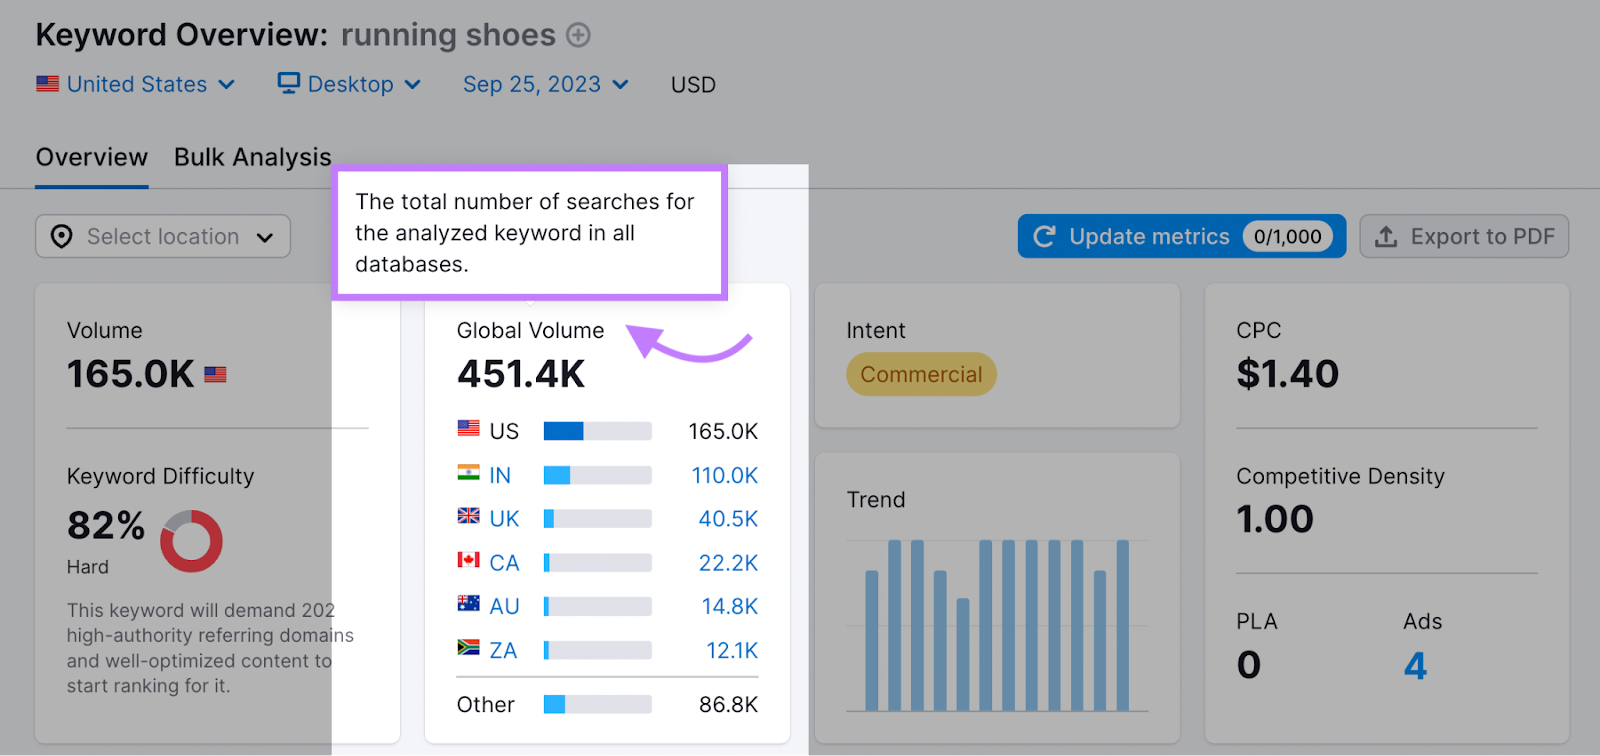 Hovering over the "Global Volume" metric in Keyword Overview